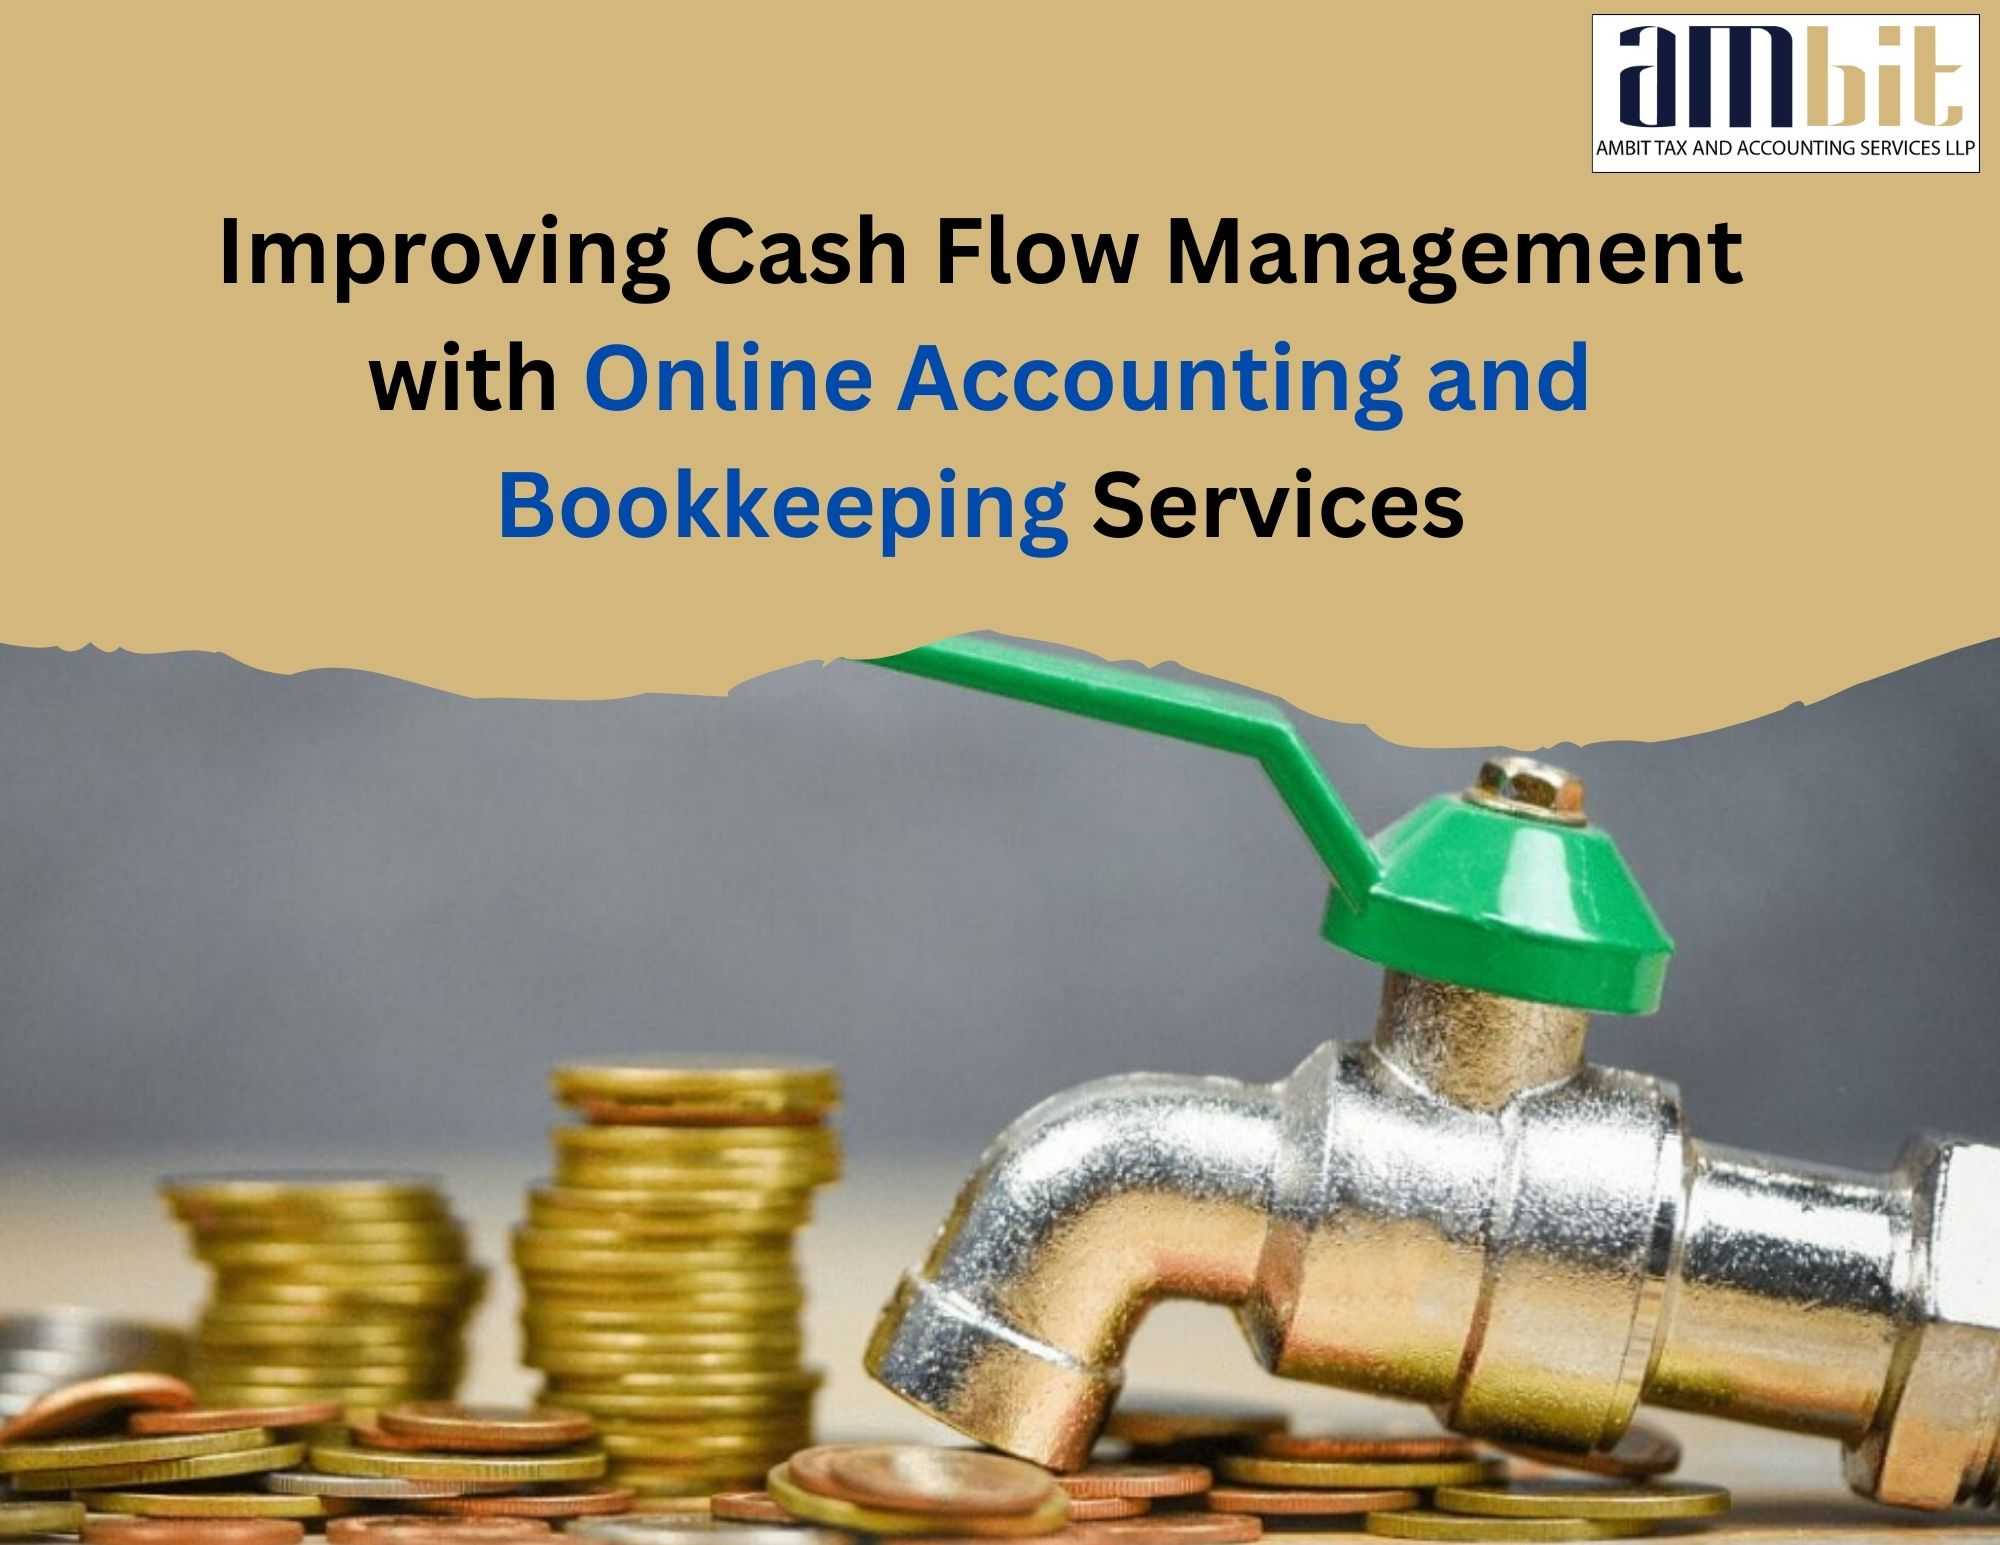  Improving Cash Flow Management with Online Accounting and Bookkeeping Services